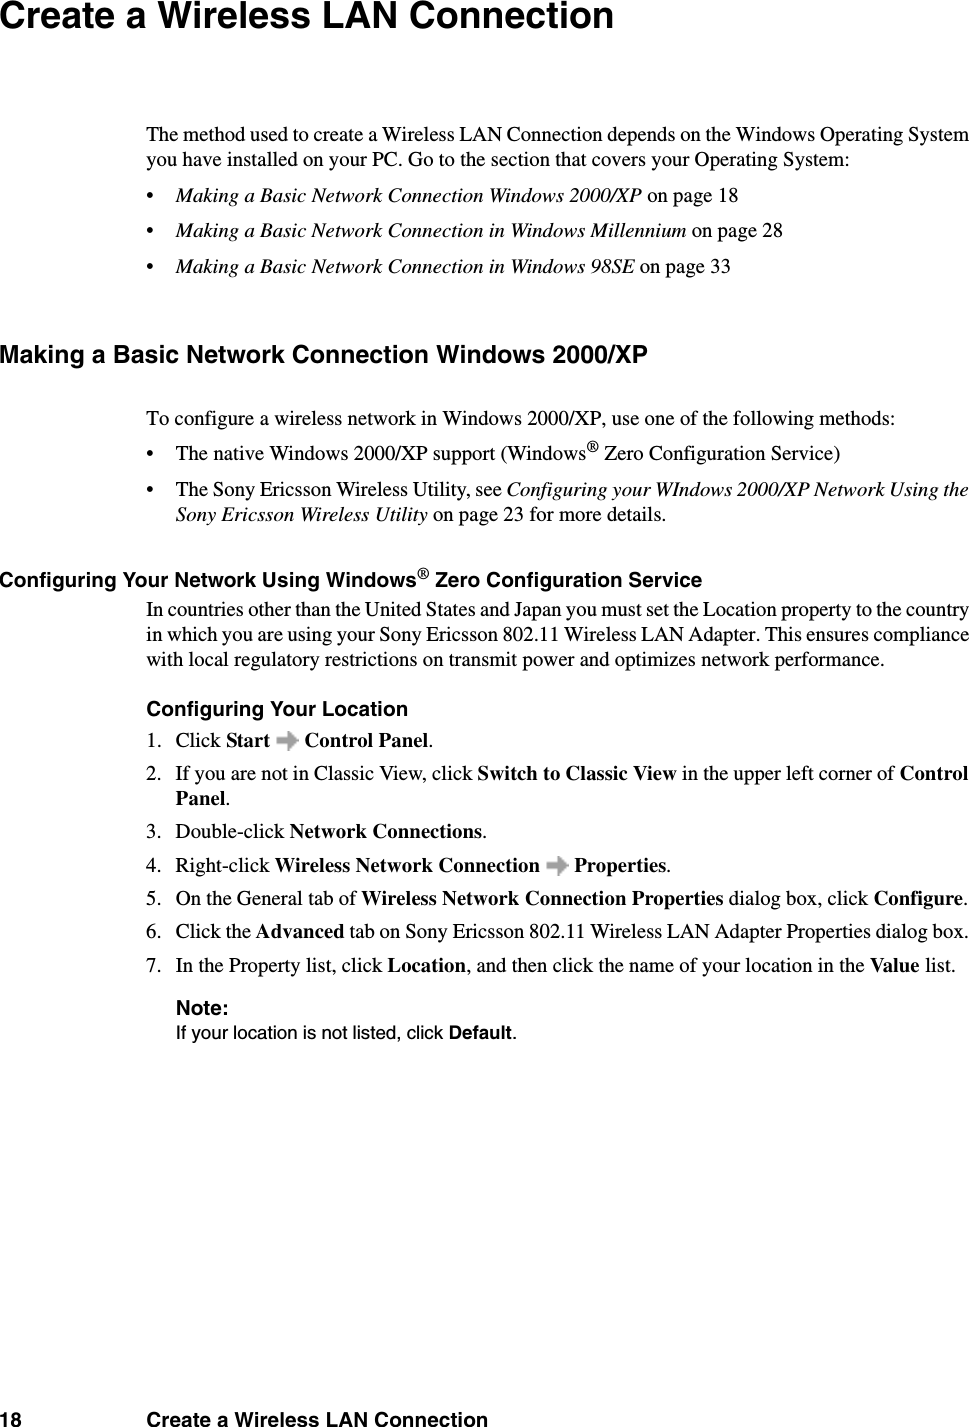 18 Create a Wireless LAN ConnectionCreate a Wireless LAN ConnectionThe method used to create a Wireless LAN Connection depends on the Windows Operating System you have installed on your PC. Go to the section that covers your Operating System:•Making a Basic Network Connection Windows 2000/XP on page 18•Making a Basic Network Connection in Windows Millennium on page 28•Making a Basic Network Connection in Windows 98SE on page 33Making a Basic Network Connection Windows 2000/XPTo configure a wireless network in Windows 2000/XP, use one of the following methods: • The native Windows 2000/XP support (Windows® Zero Configuration Service) • The Sony Ericsson Wireless Utility, see Configuring your WIndows 2000/XP Network Using the Sony Ericsson Wireless Utility on page 23 for more details. Configuring Your Network Using Windows® Zero Configuration ServiceIn countries other than the United States and Japan you must set the Location property to the country in which you are using your Sony Ericsson 802.11 Wireless LAN Adapter. This ensures compliance with local regulatory restrictions on transmit power and optimizes network performance. Configuring Your Location1. Click Start  Control Panel. 2. If you are not in Classic View, click Switch to Classic View in the upper left corner of Control Panel. 3. Double-click Network Connections. 4. Right-click Wireless Network Connection   Properties. 5. On the General tab of Wireless Network Connection Properties dialog box, click Configure. 6. Click the Advanced tab on Sony Ericsson 802.11 Wireless LAN Adapter Properties dialog box. 7. In the Property list, click Location, and then click the name of your location in the Value  list. Note: If your location is not listed, click Default. 